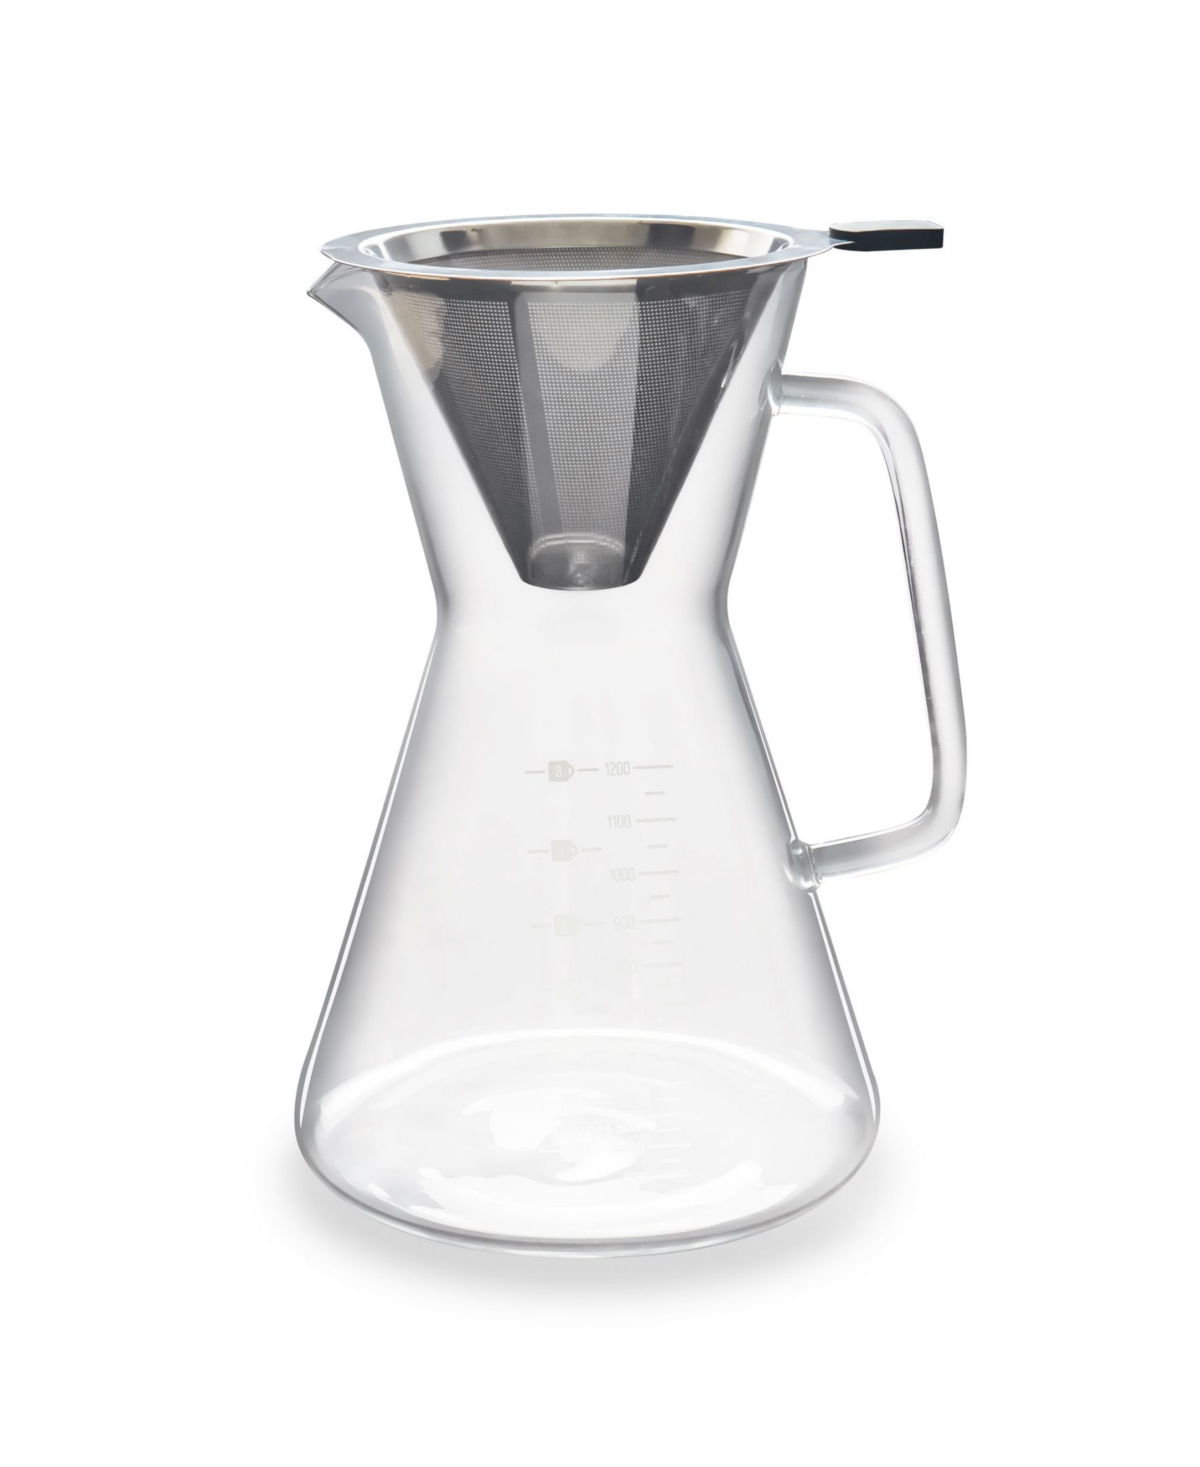 London Sip Glass Pour Over Carafe With Filter, 1200ml In Silver